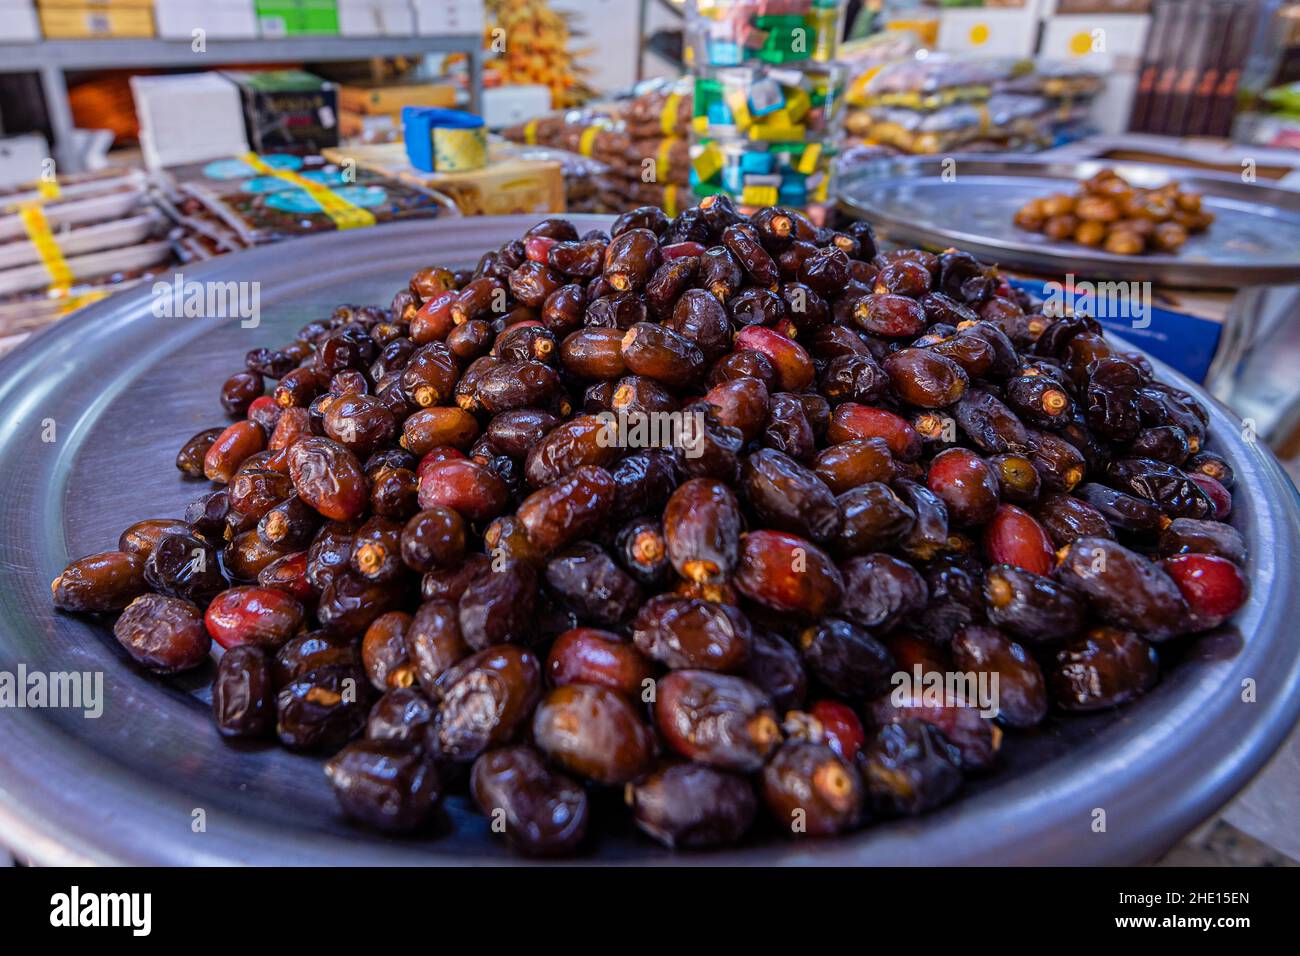 date fruit, the specialty of the country of Dubai Stock Photo